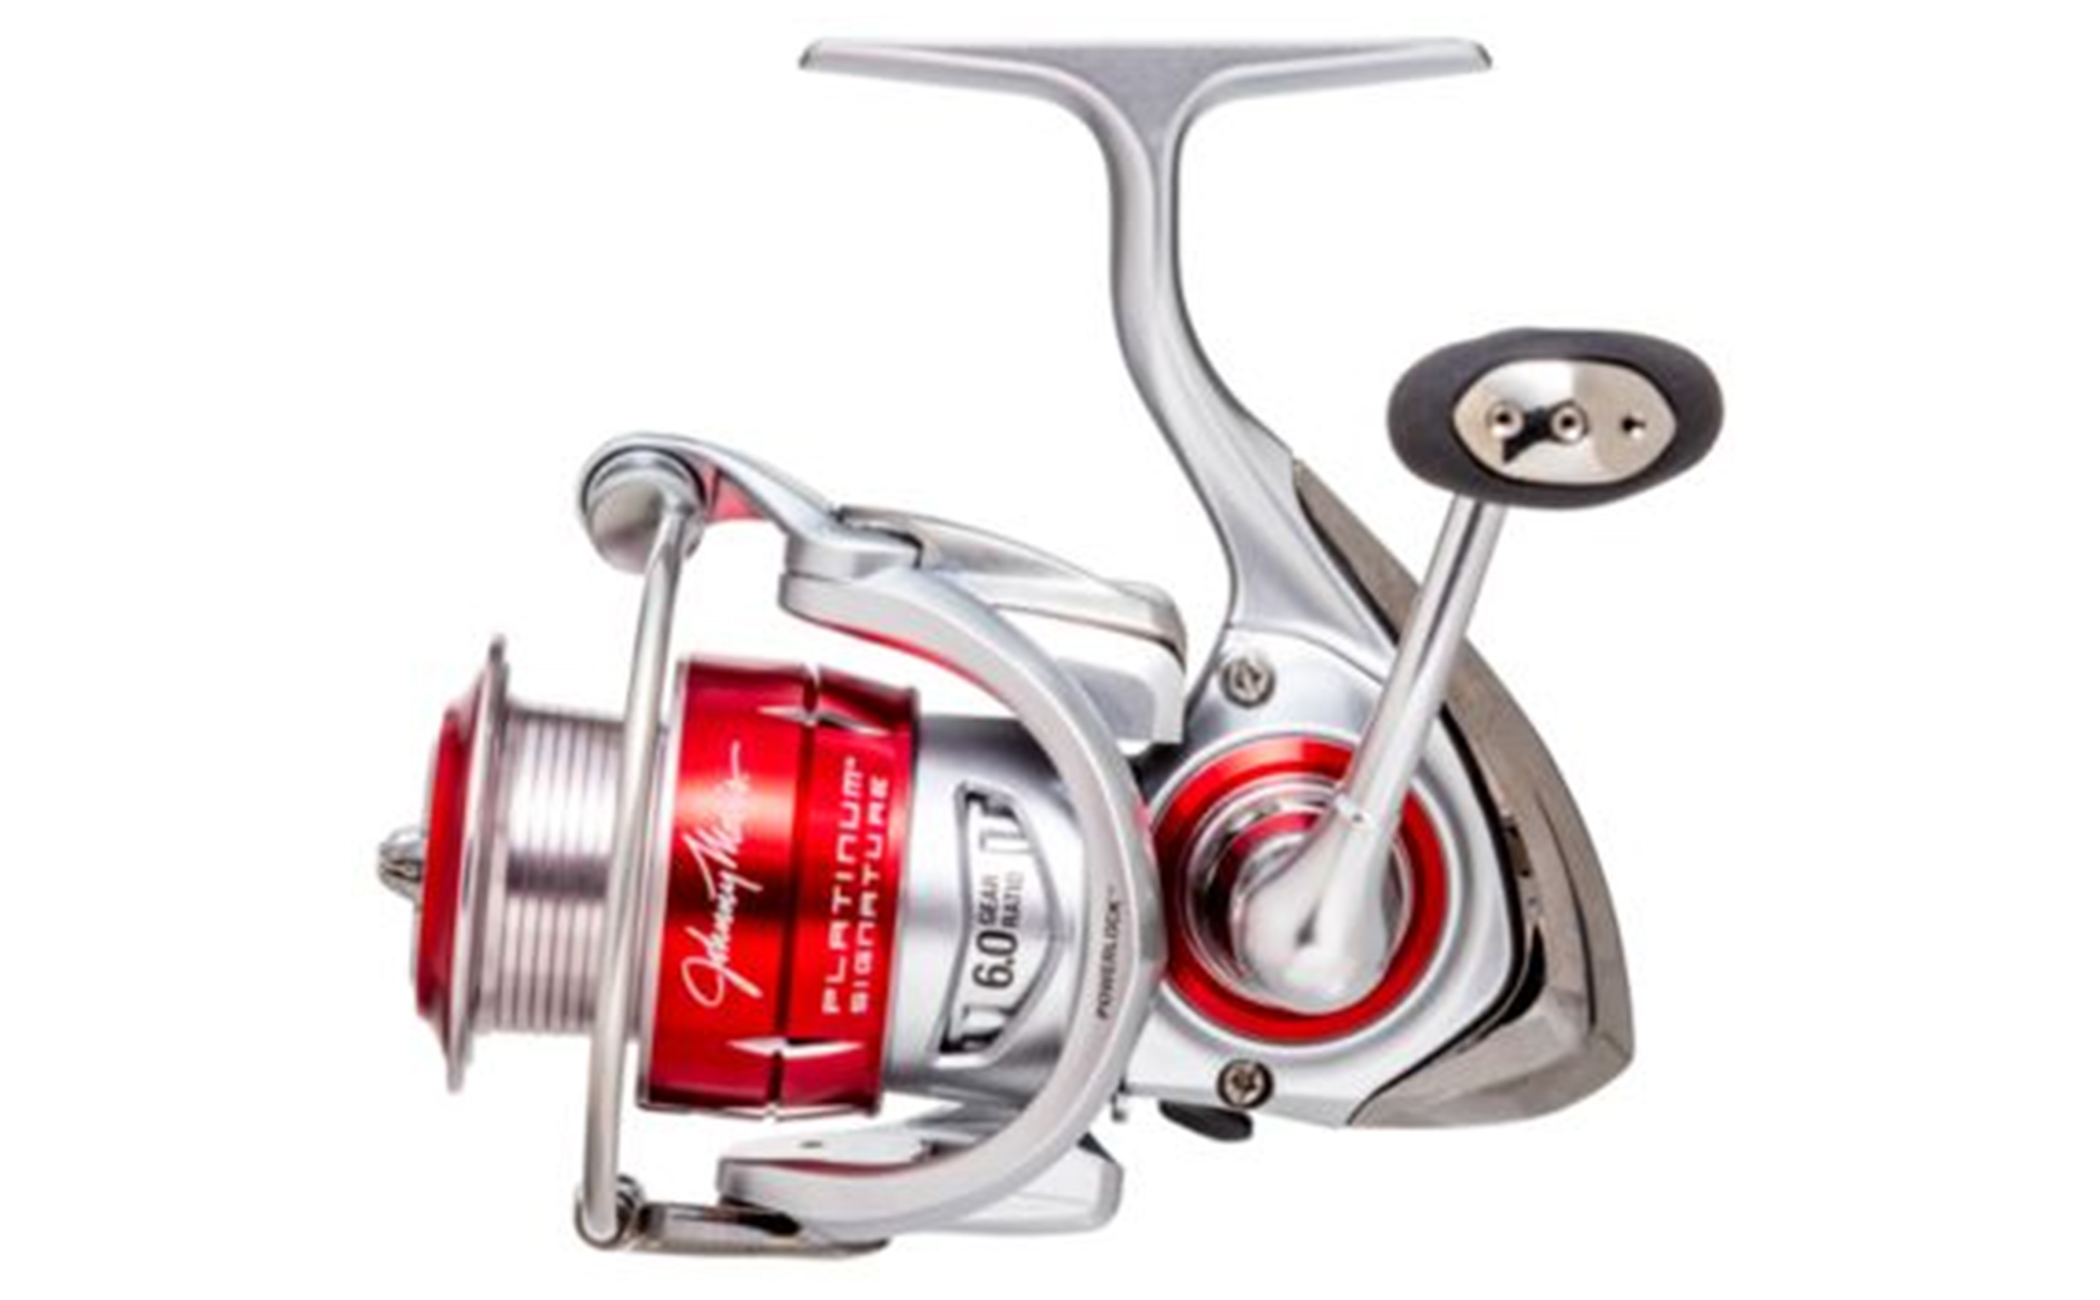 Fishing Spinning Reel Buyer's Guide